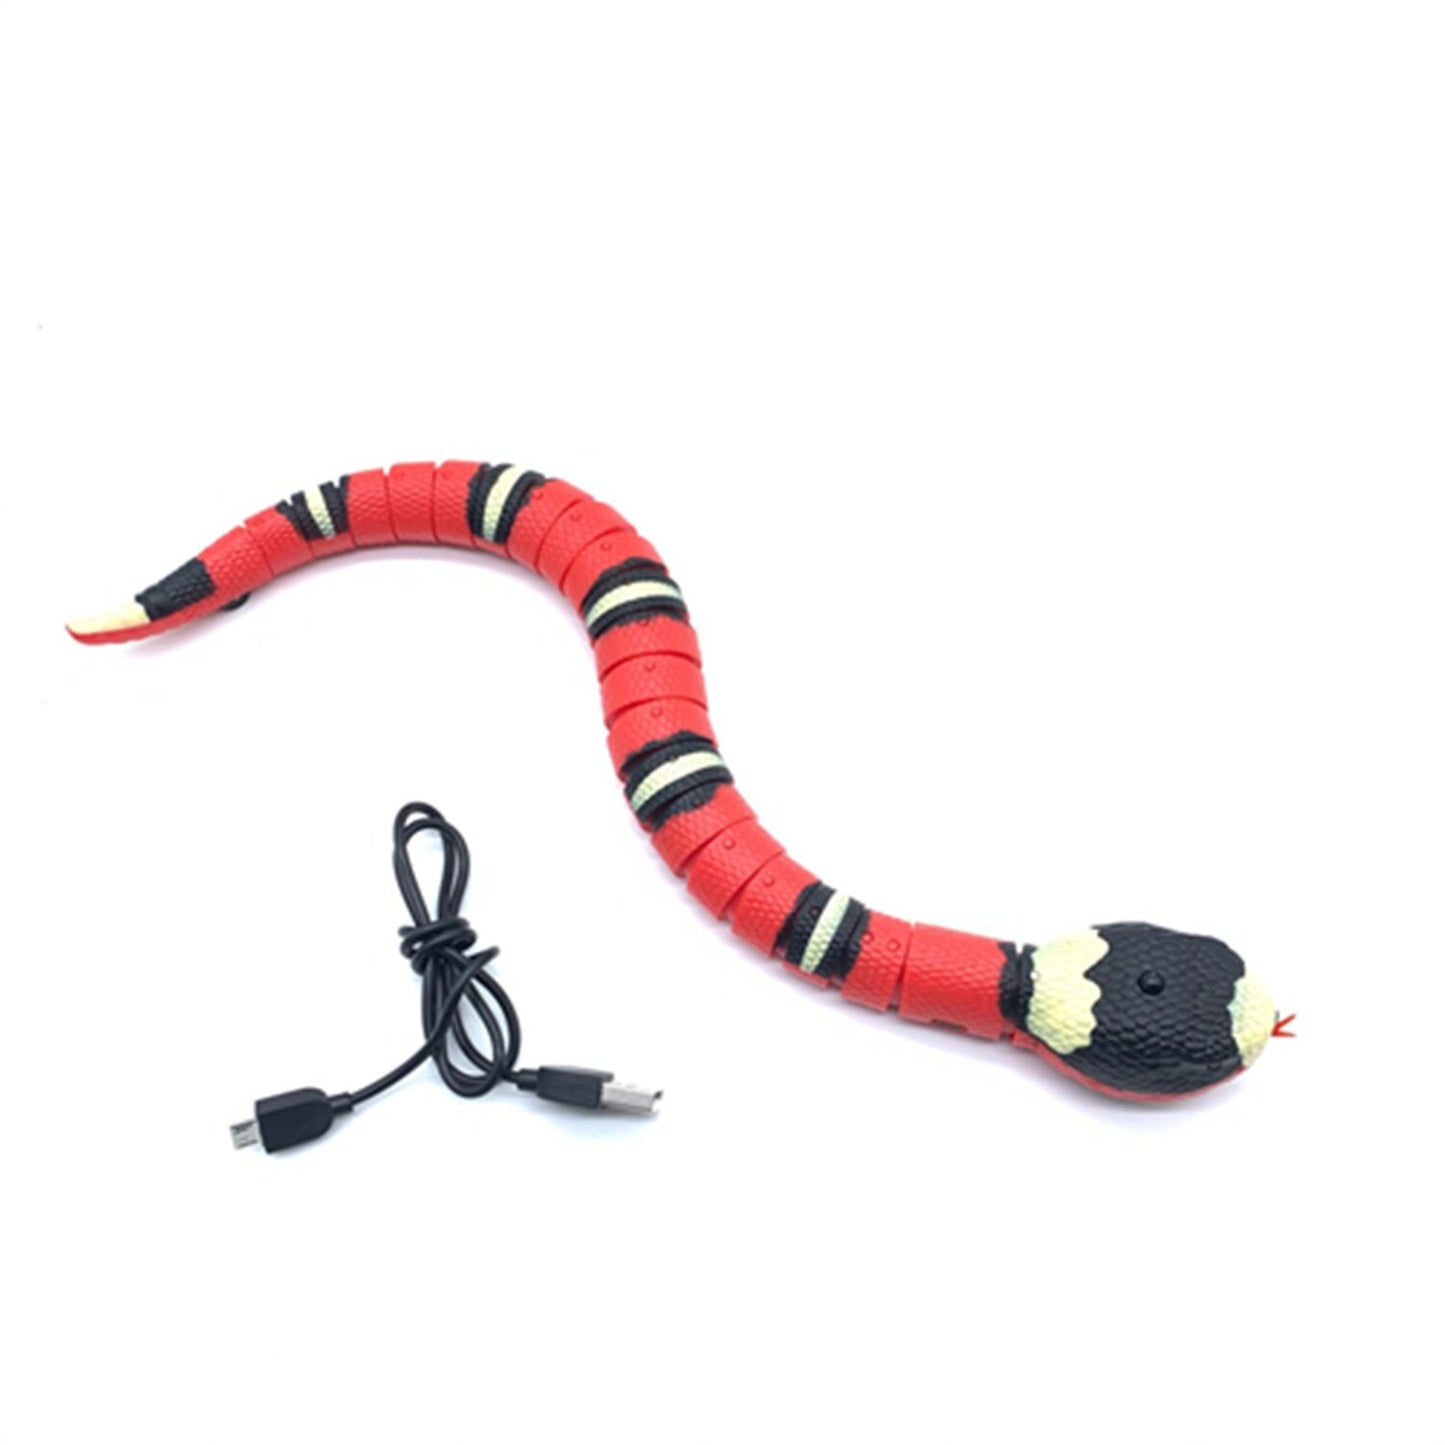 Best Smart Sensing Snake Cats Dogs Toy Slithering Action Great fun for Pets